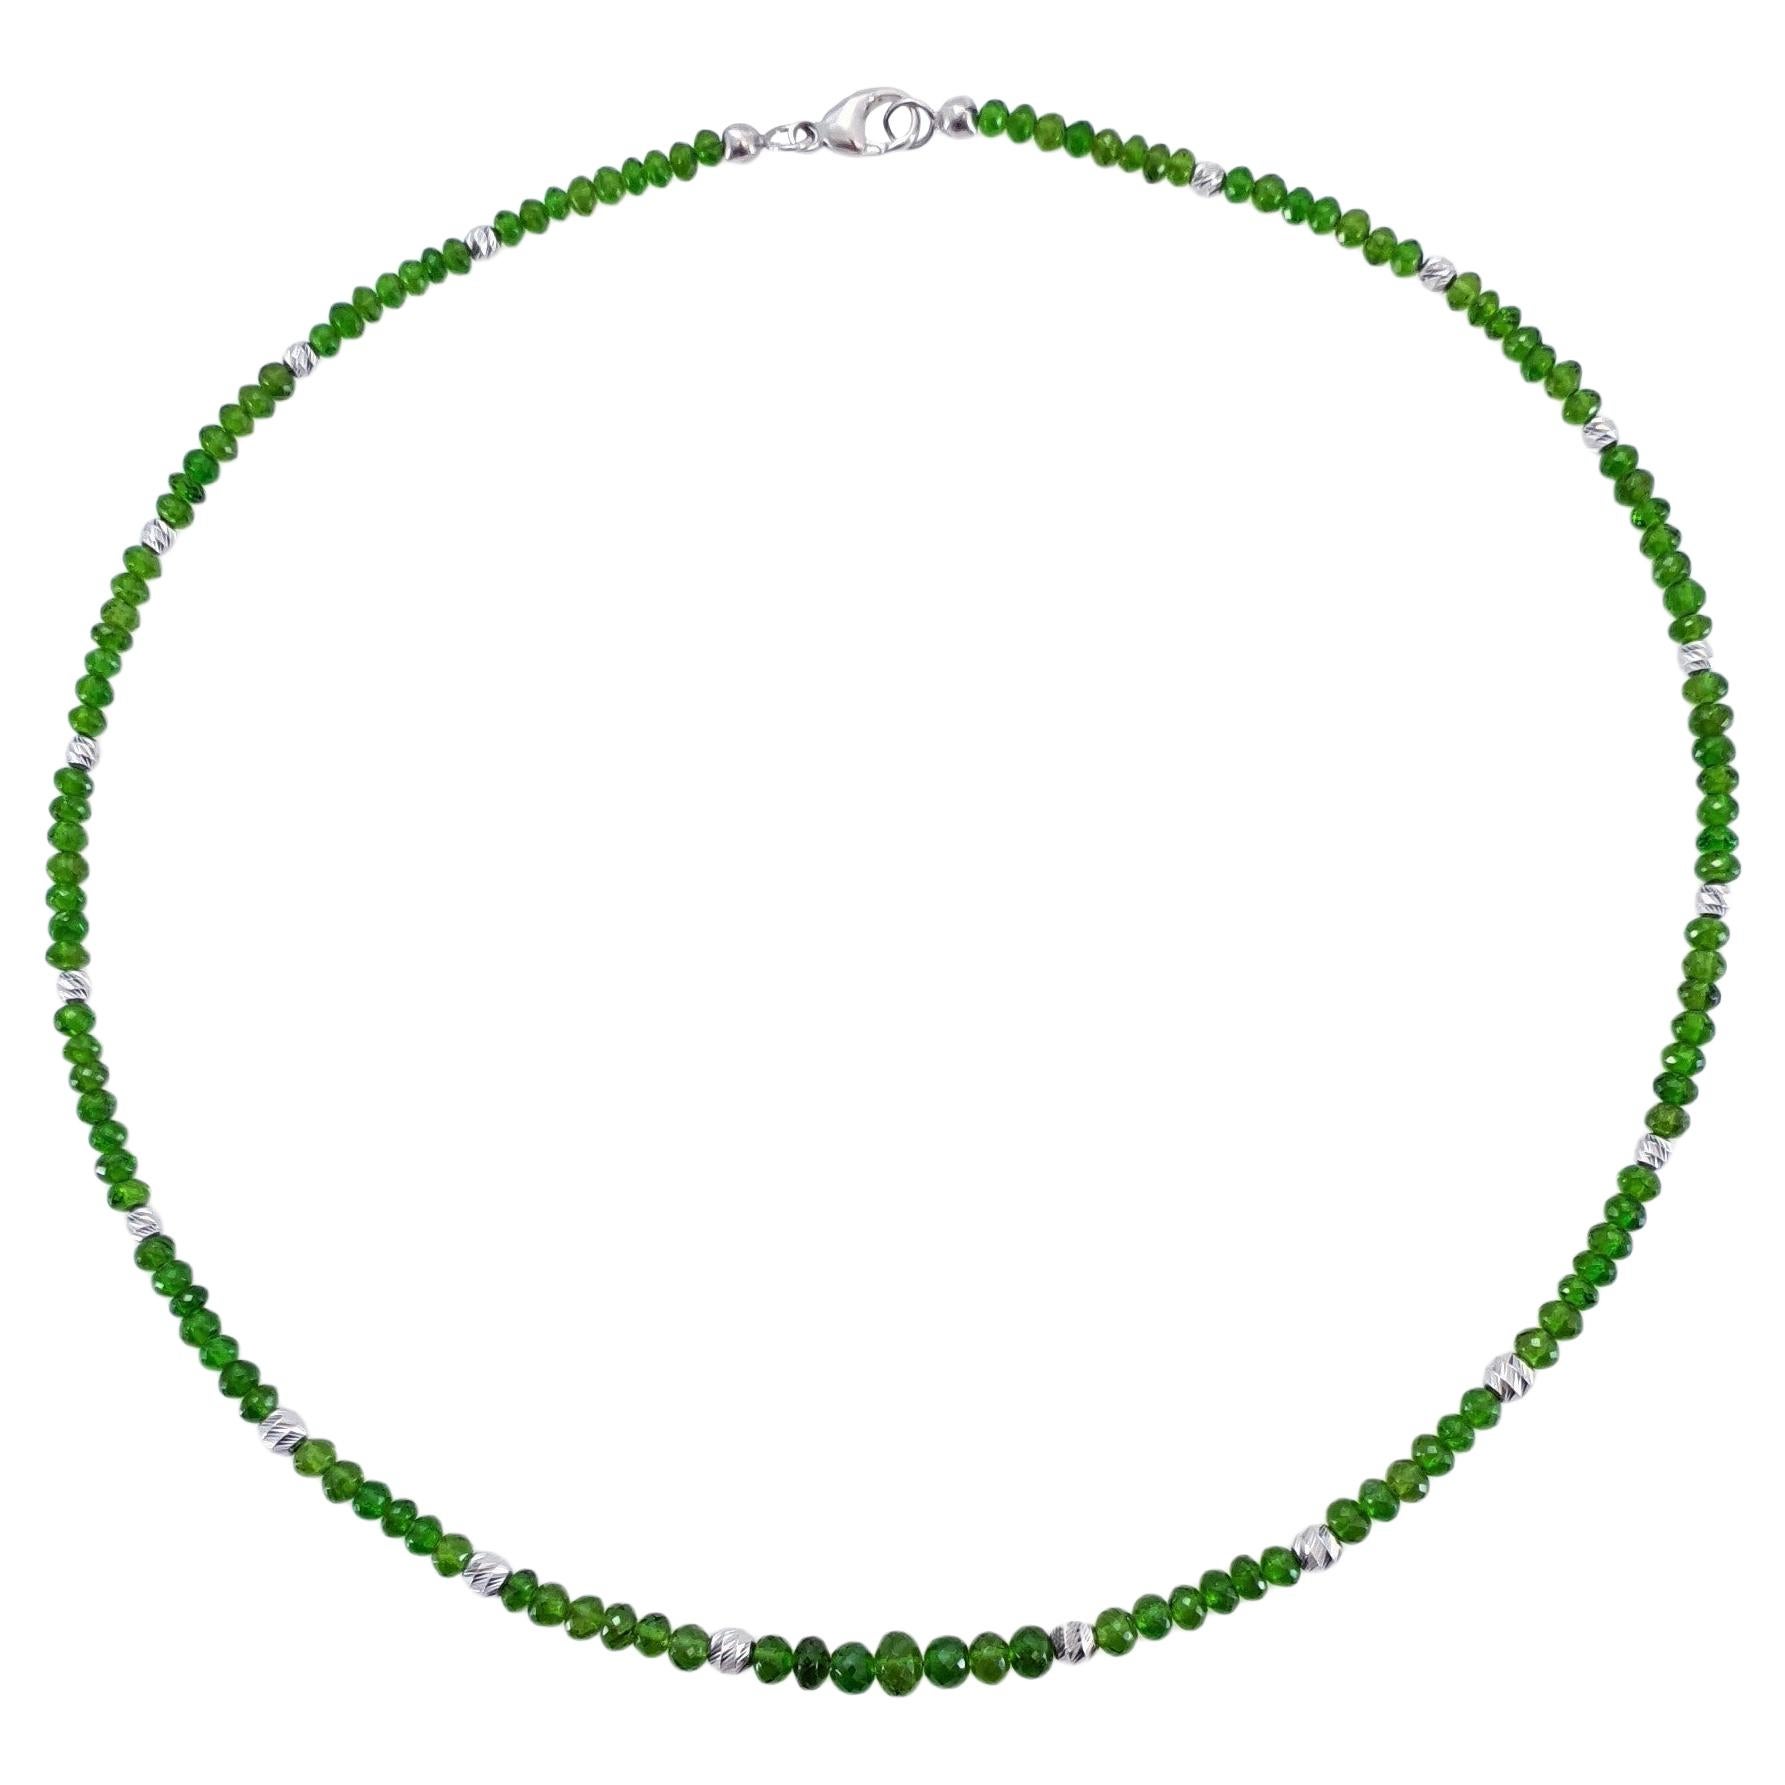 Emerald Green Chromium Diopside Rondel Beaded Necklace with 18 Carat white Gold For Sale